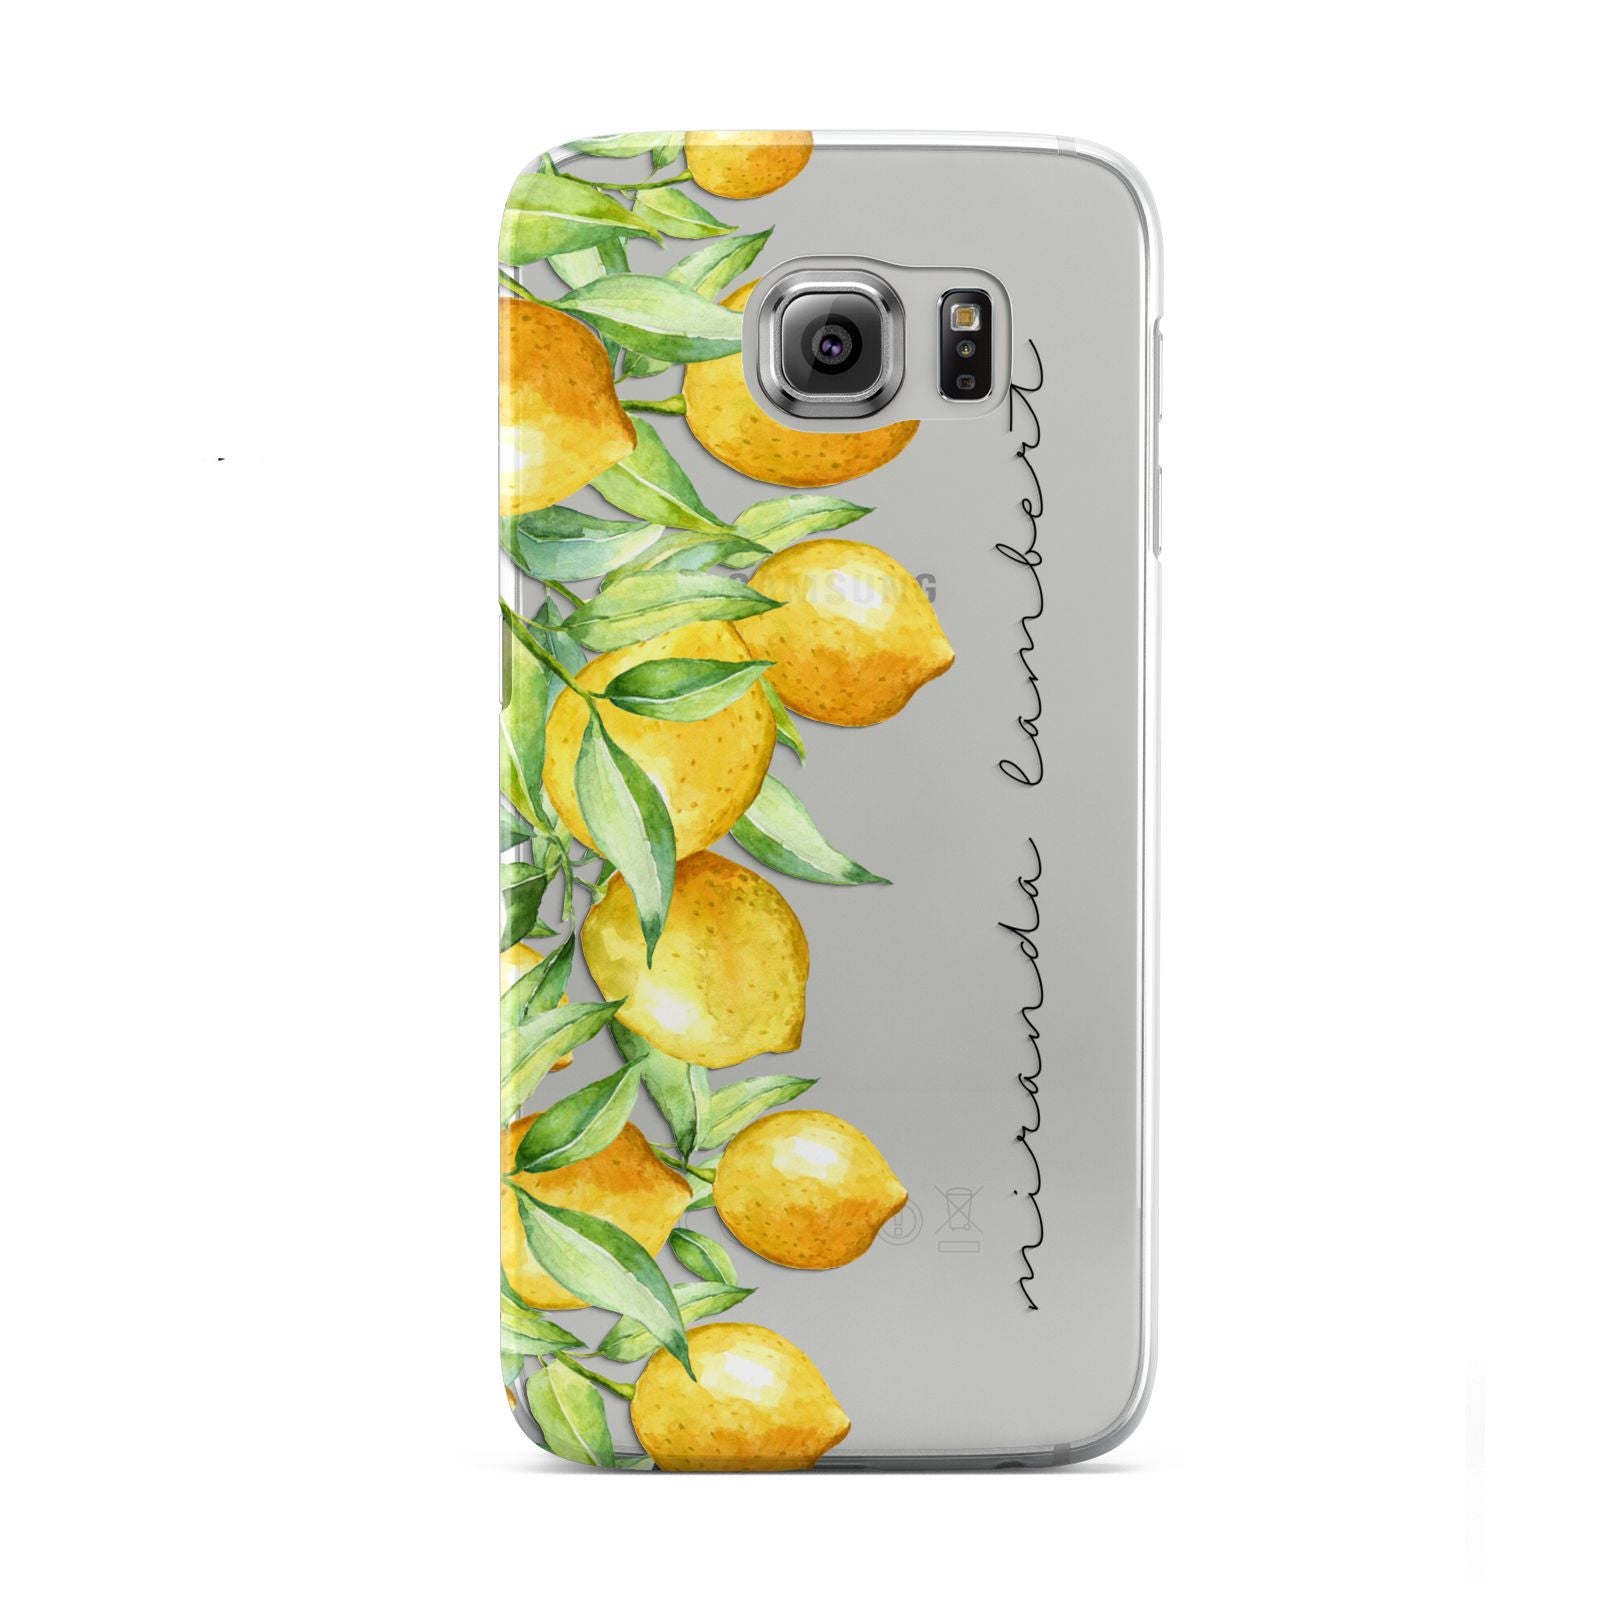 Personalised Lemon Bunches Samsung Galaxy S6 Case